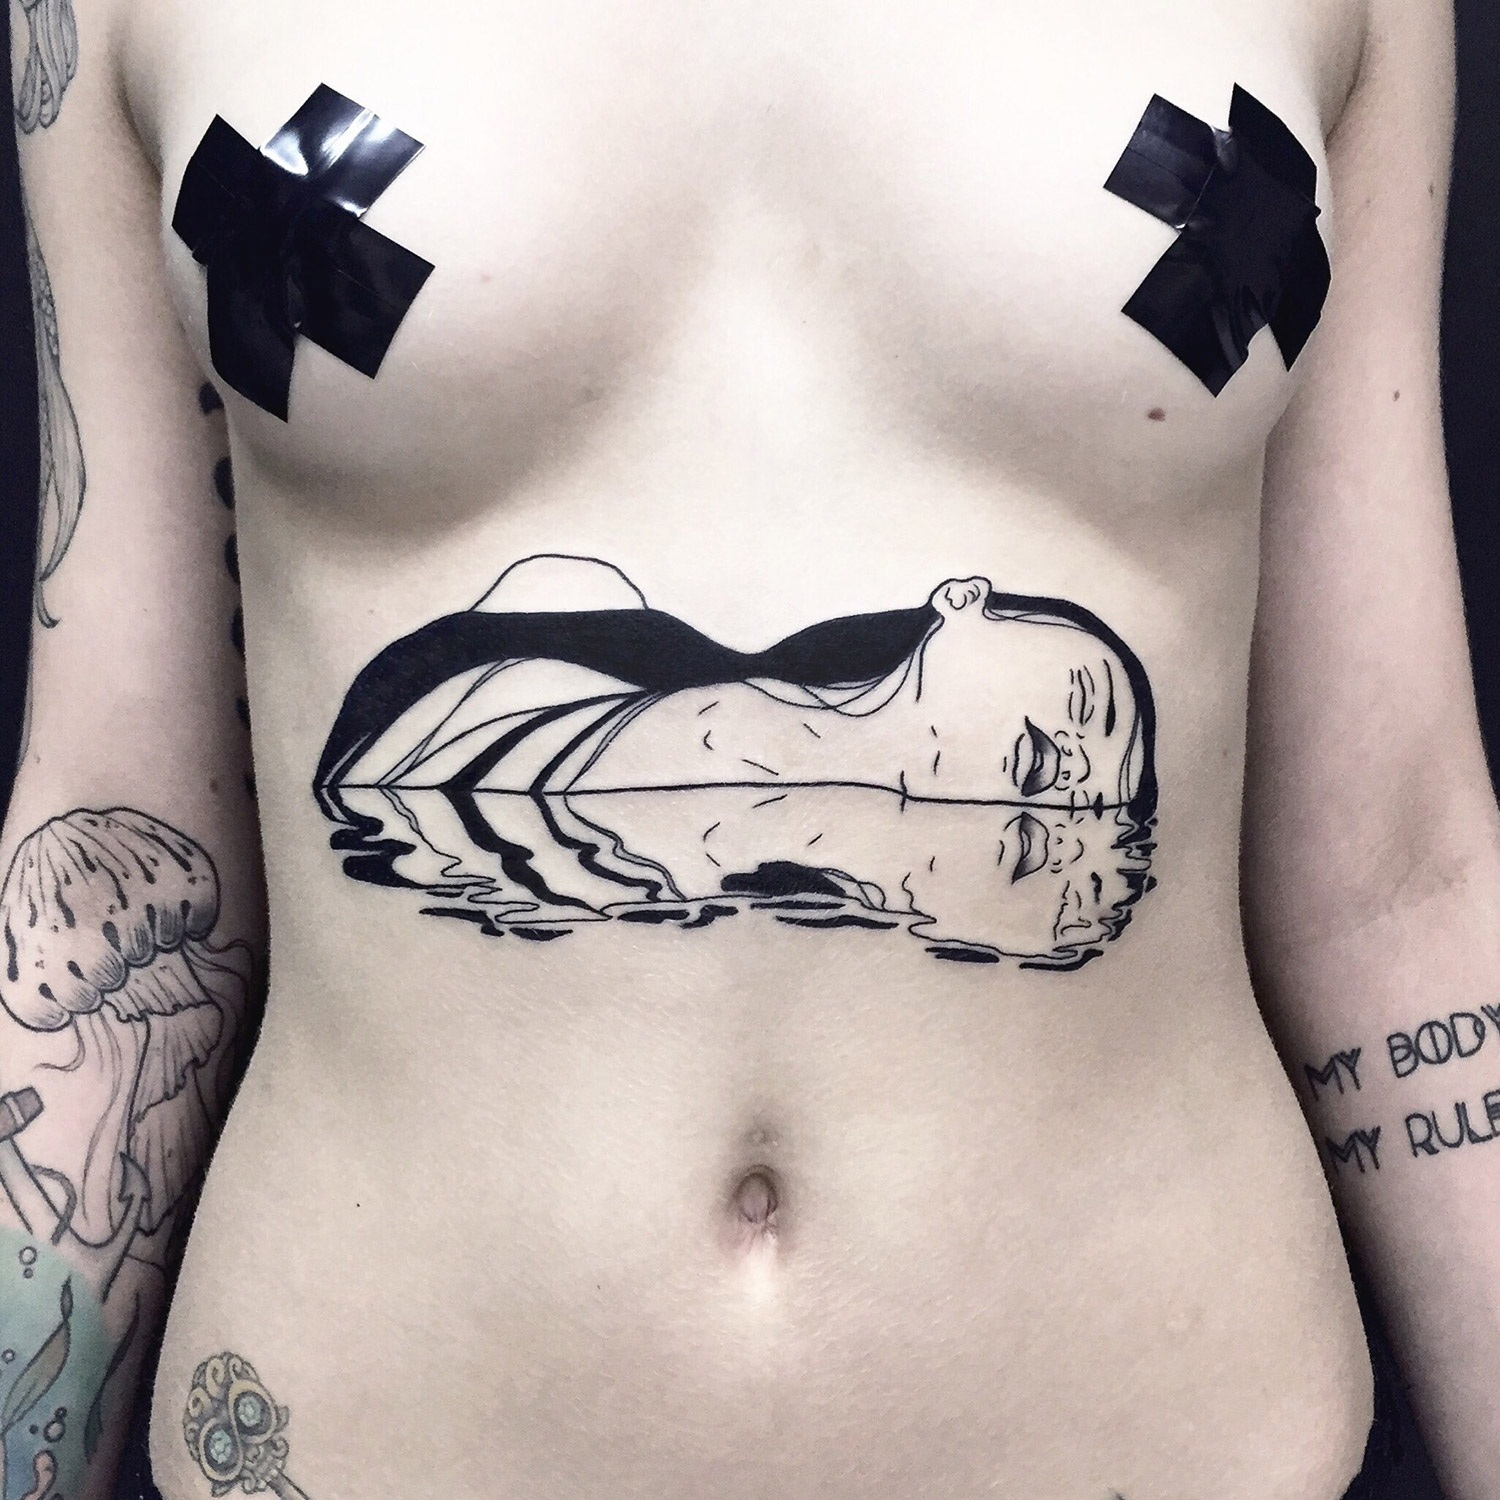 Silly Jane, Tattoo - woman floating sideways with reflection